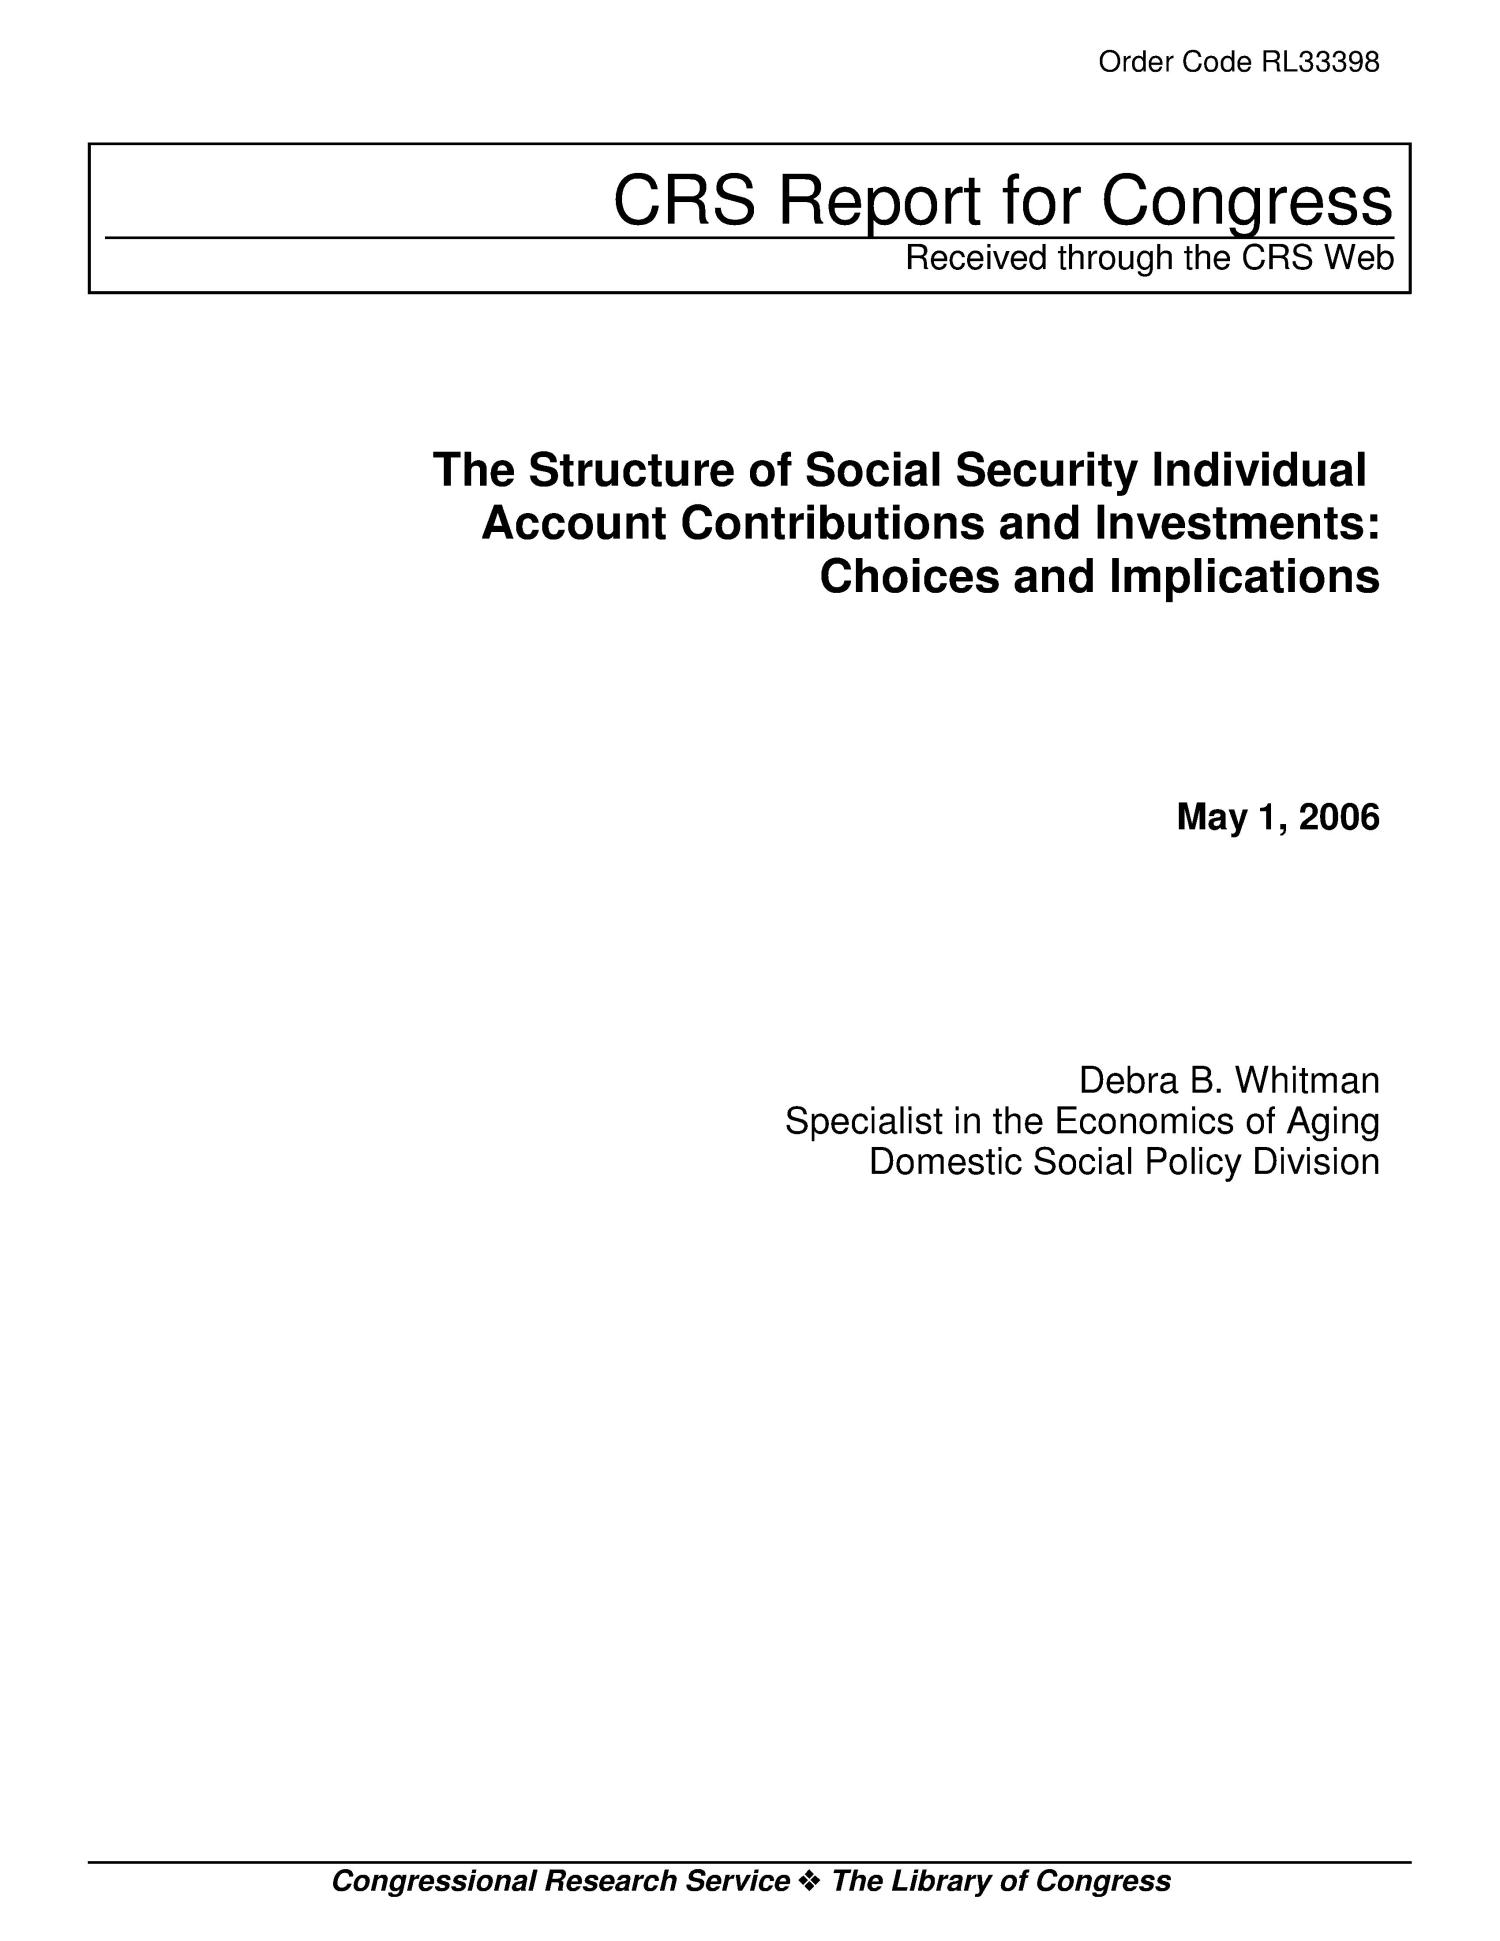 The Structure of Social Security Individual Account Contributions and Investments: Choices and Implications
                                                
                                                    [Sequence #]: 1 of 46
                                                